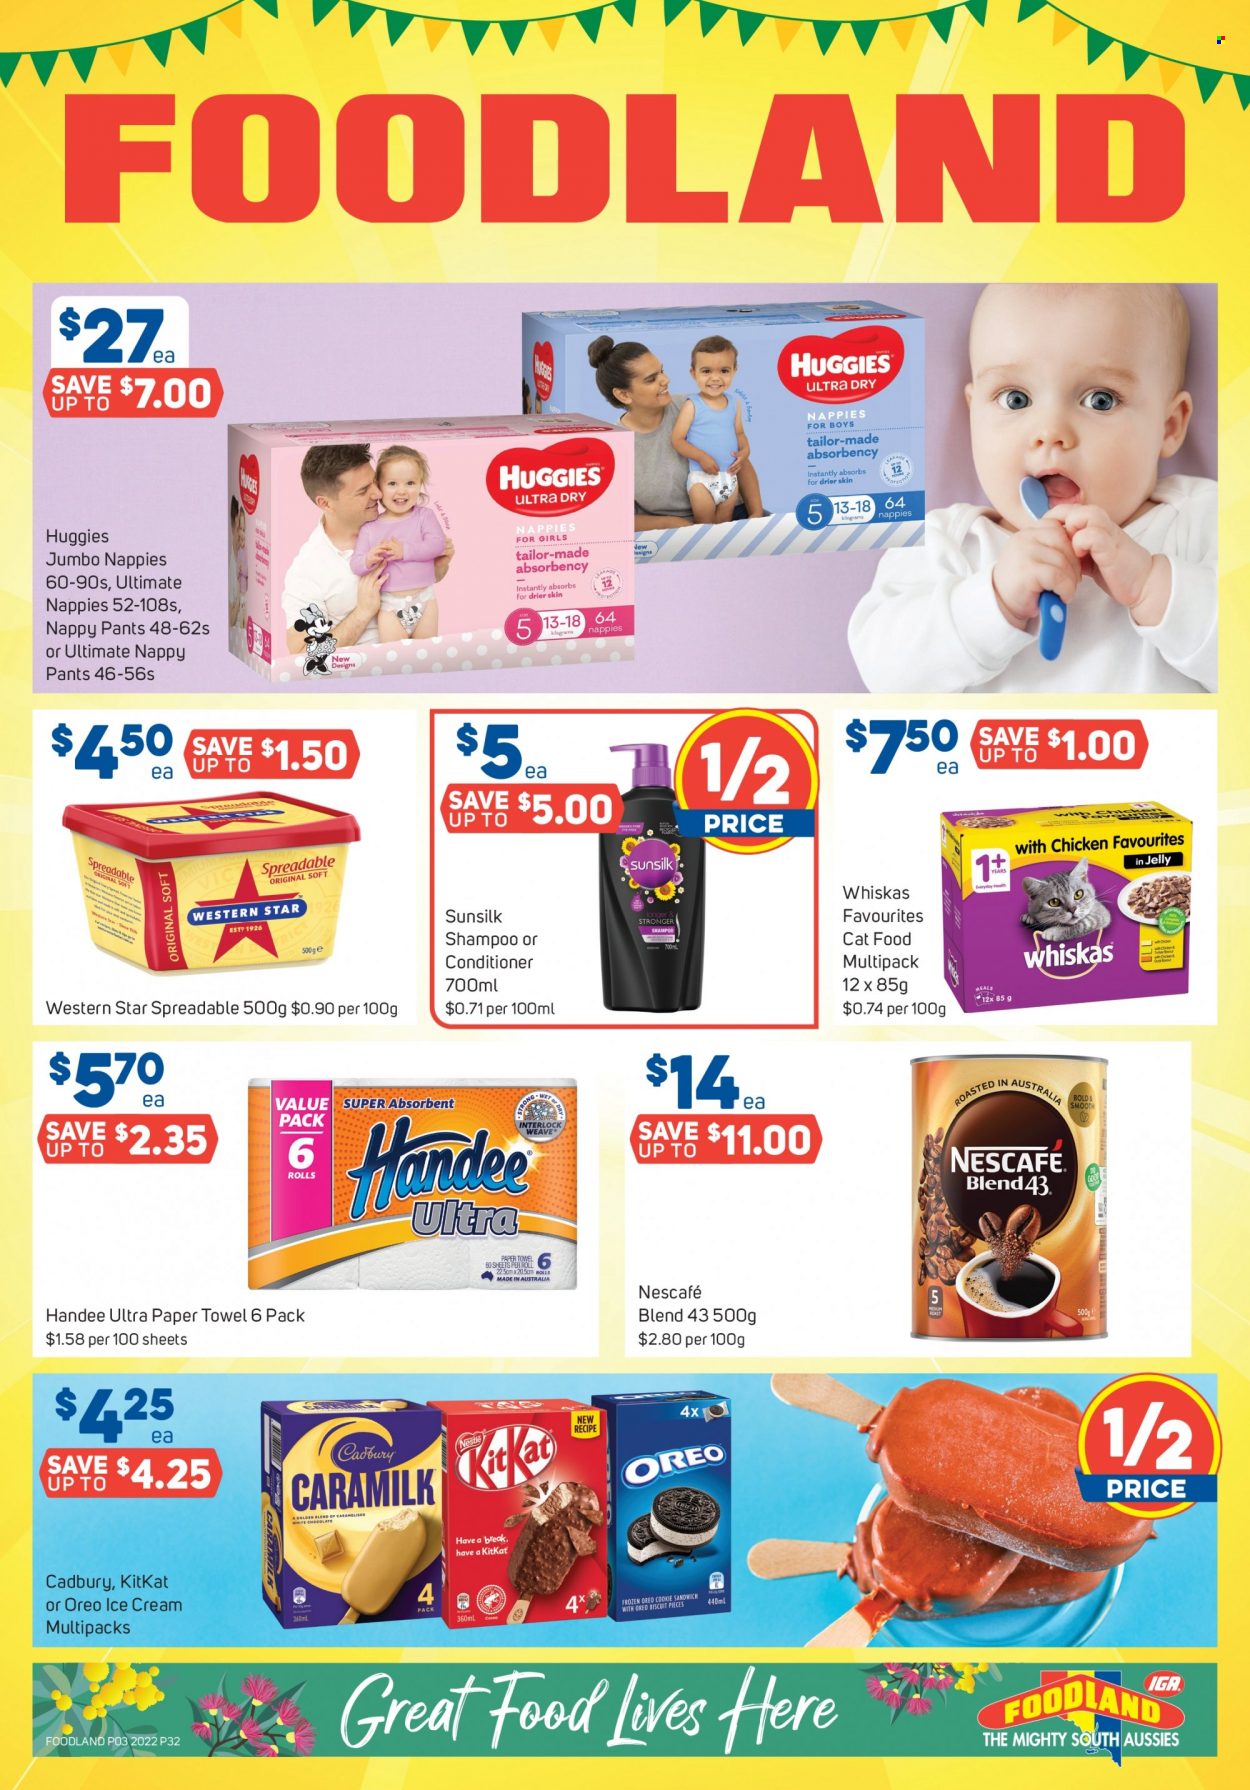 thumbnail - Foodland Catalogue - 19 Jan 2022 - 25 Jan 2022 - Sales products - sandwich, Western Star Spreadable, Western Star, Oreo, ice cream, Nestlé, KitKat, biscuit, Cadbury, Nescafé, Huggies, pants, nappies, Handee, paper towels, shampoo, Sunsilk, conditioner, animal food, cat food, Whiskas. Page 32.